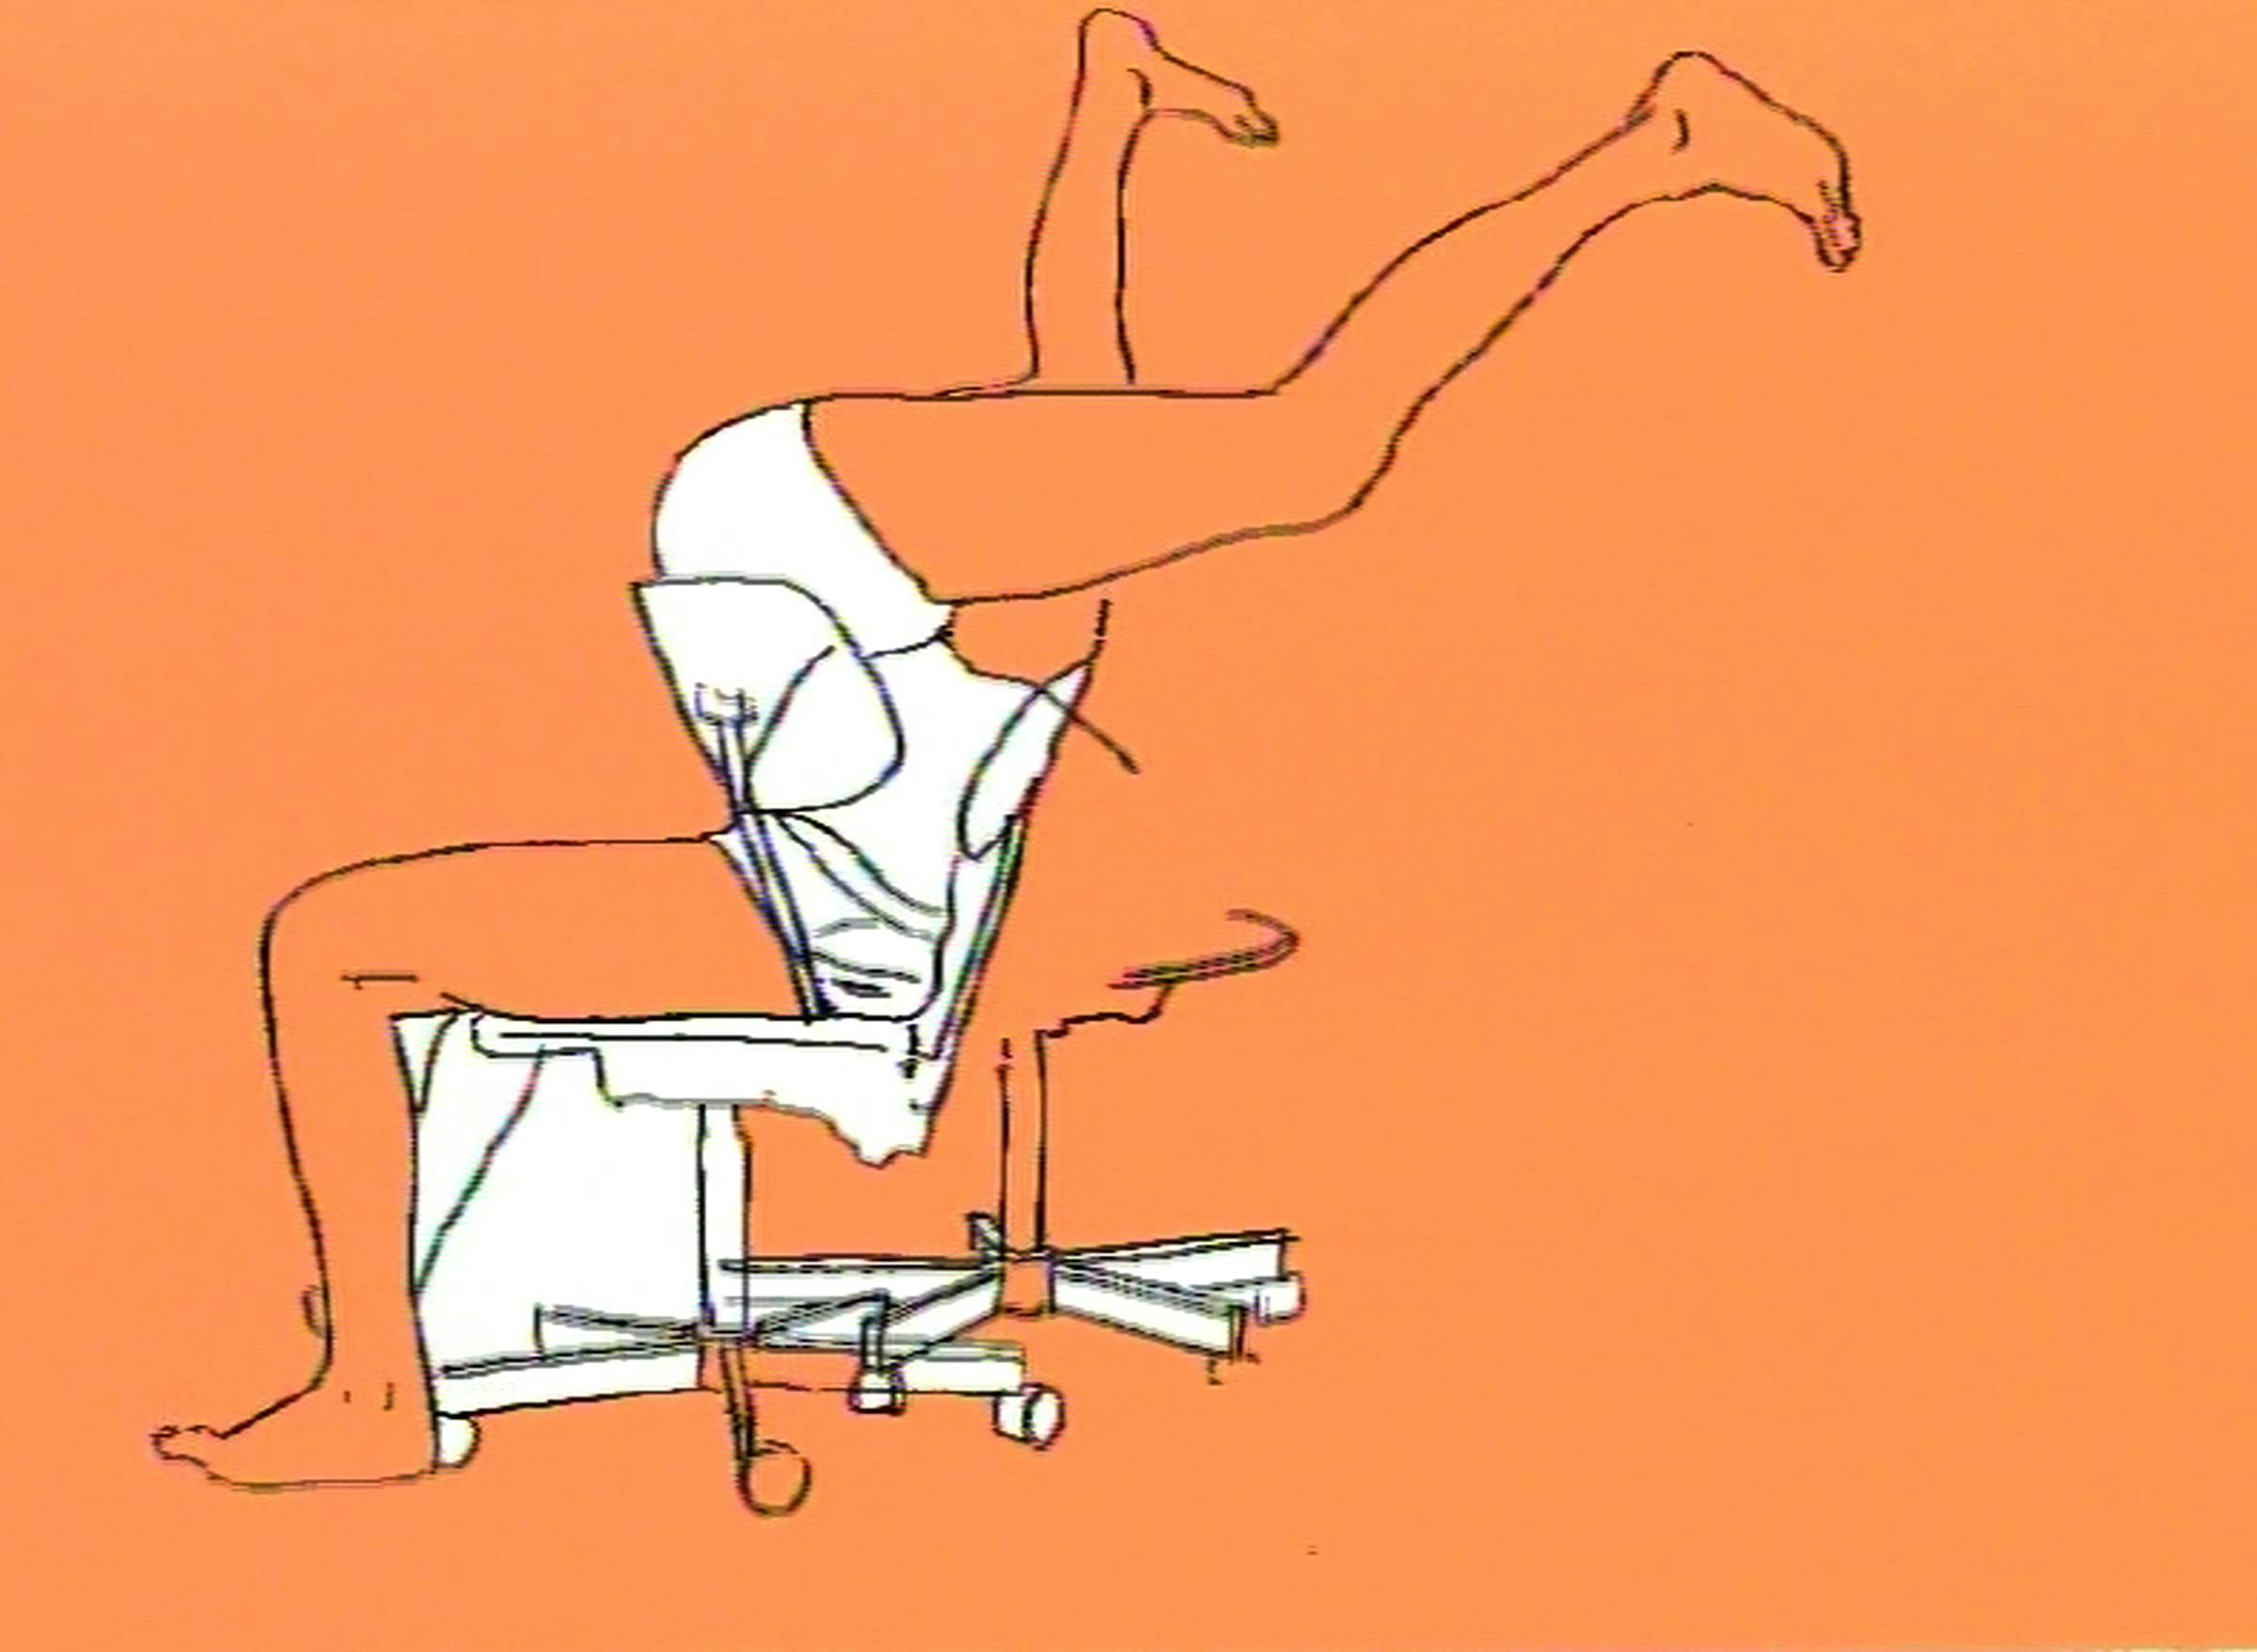 Image of a line-drawn animation of two figures without heads sat on an office chair. The drawing is in black and white and they are set against an orange background.